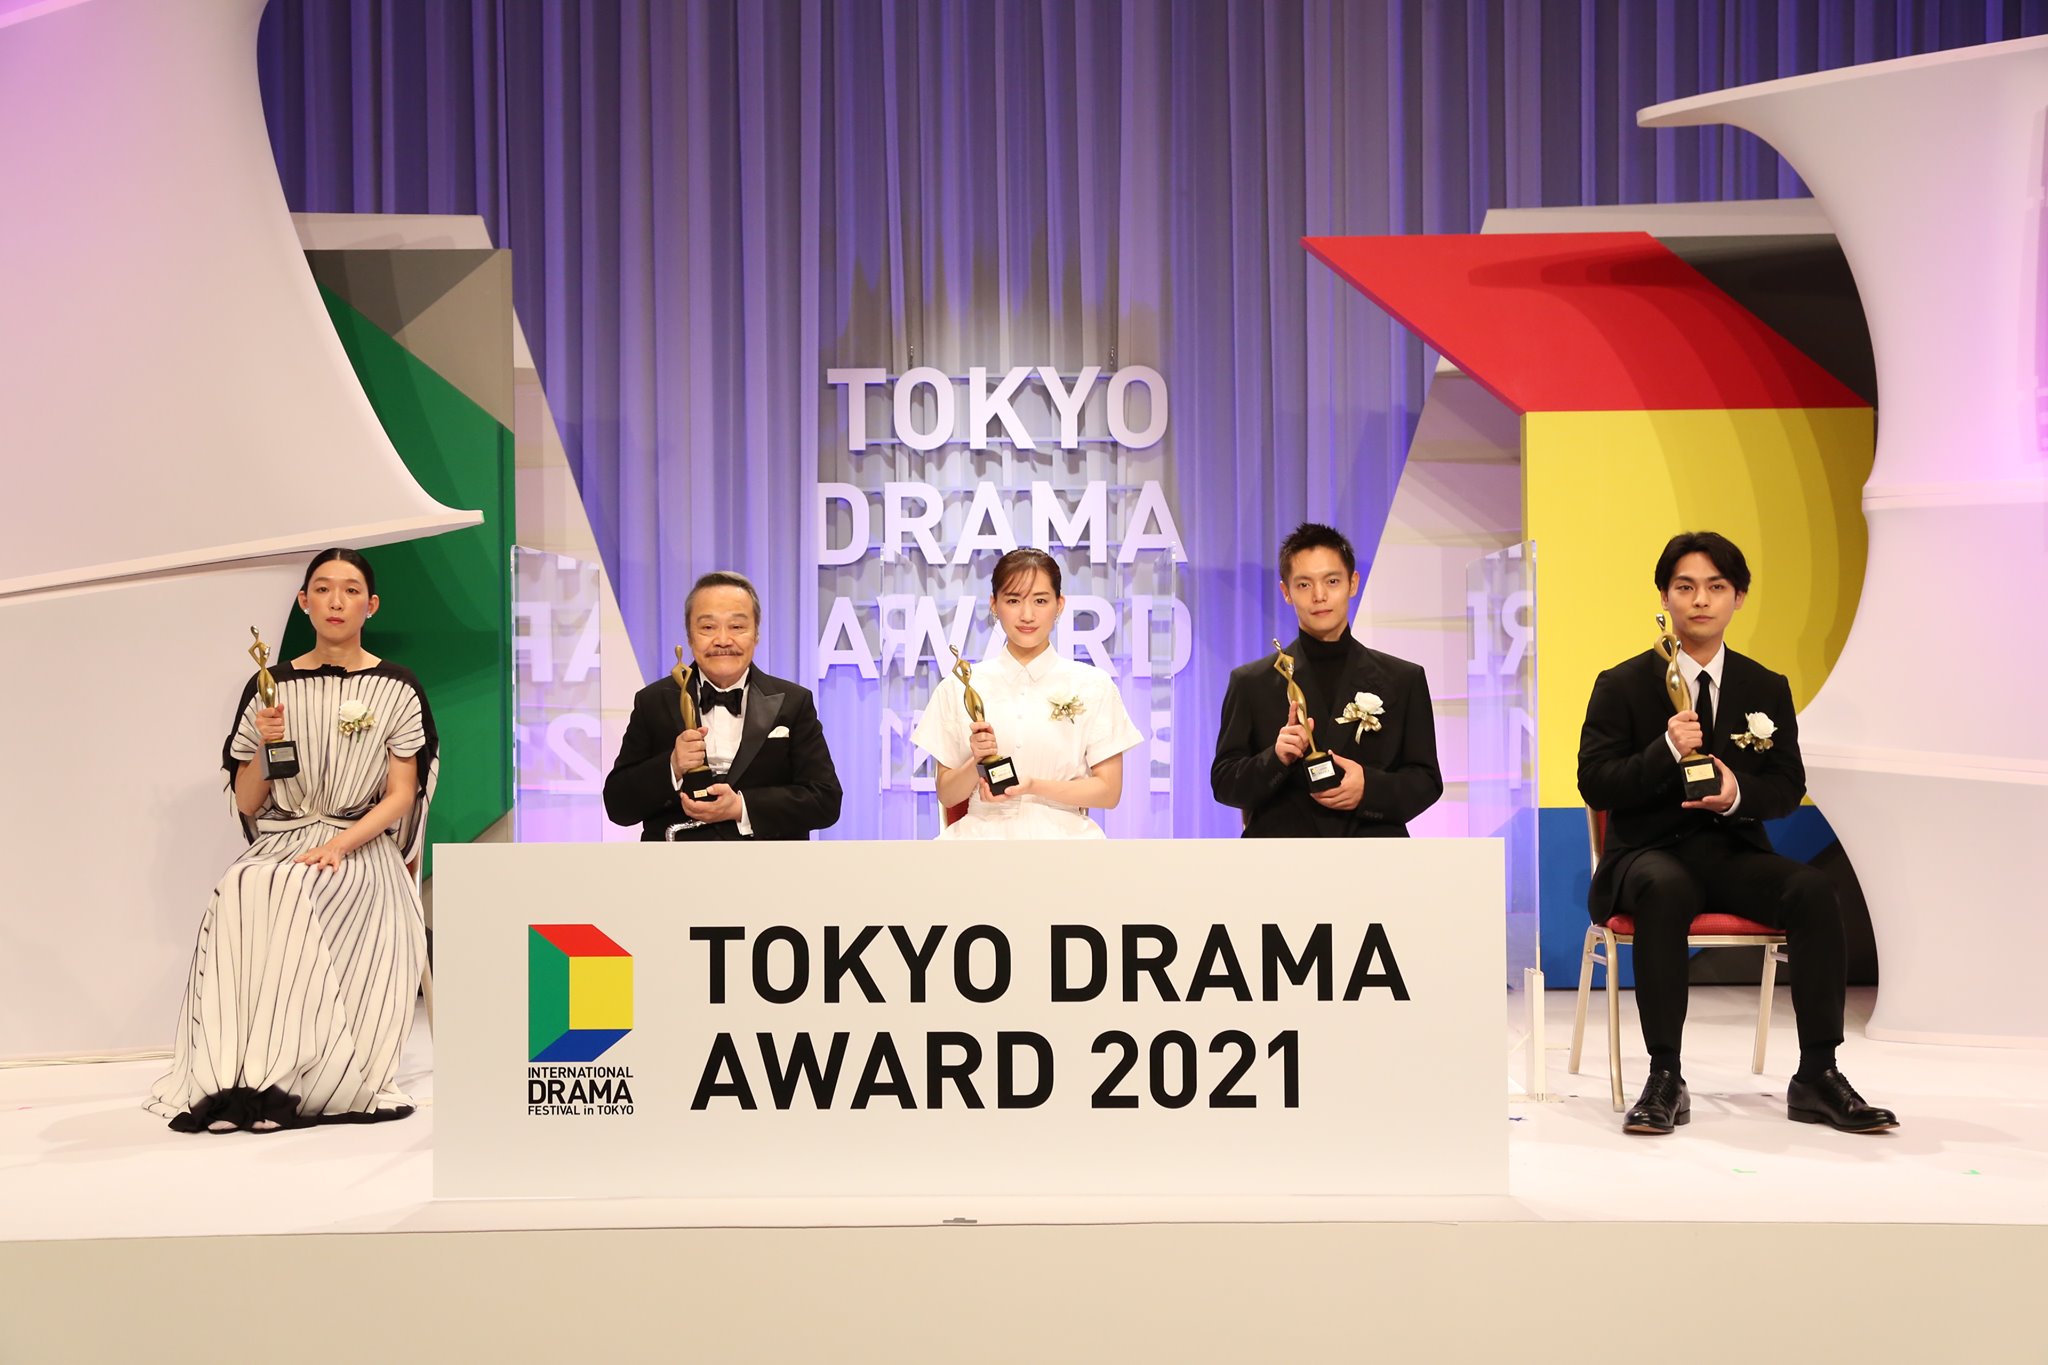 2021 International Drama Festival in Tokyo rounded off. (Photo / Retrieved from the Facebook: 台日Hot什麼？哈！－輕鬆電台 FM 96.9)